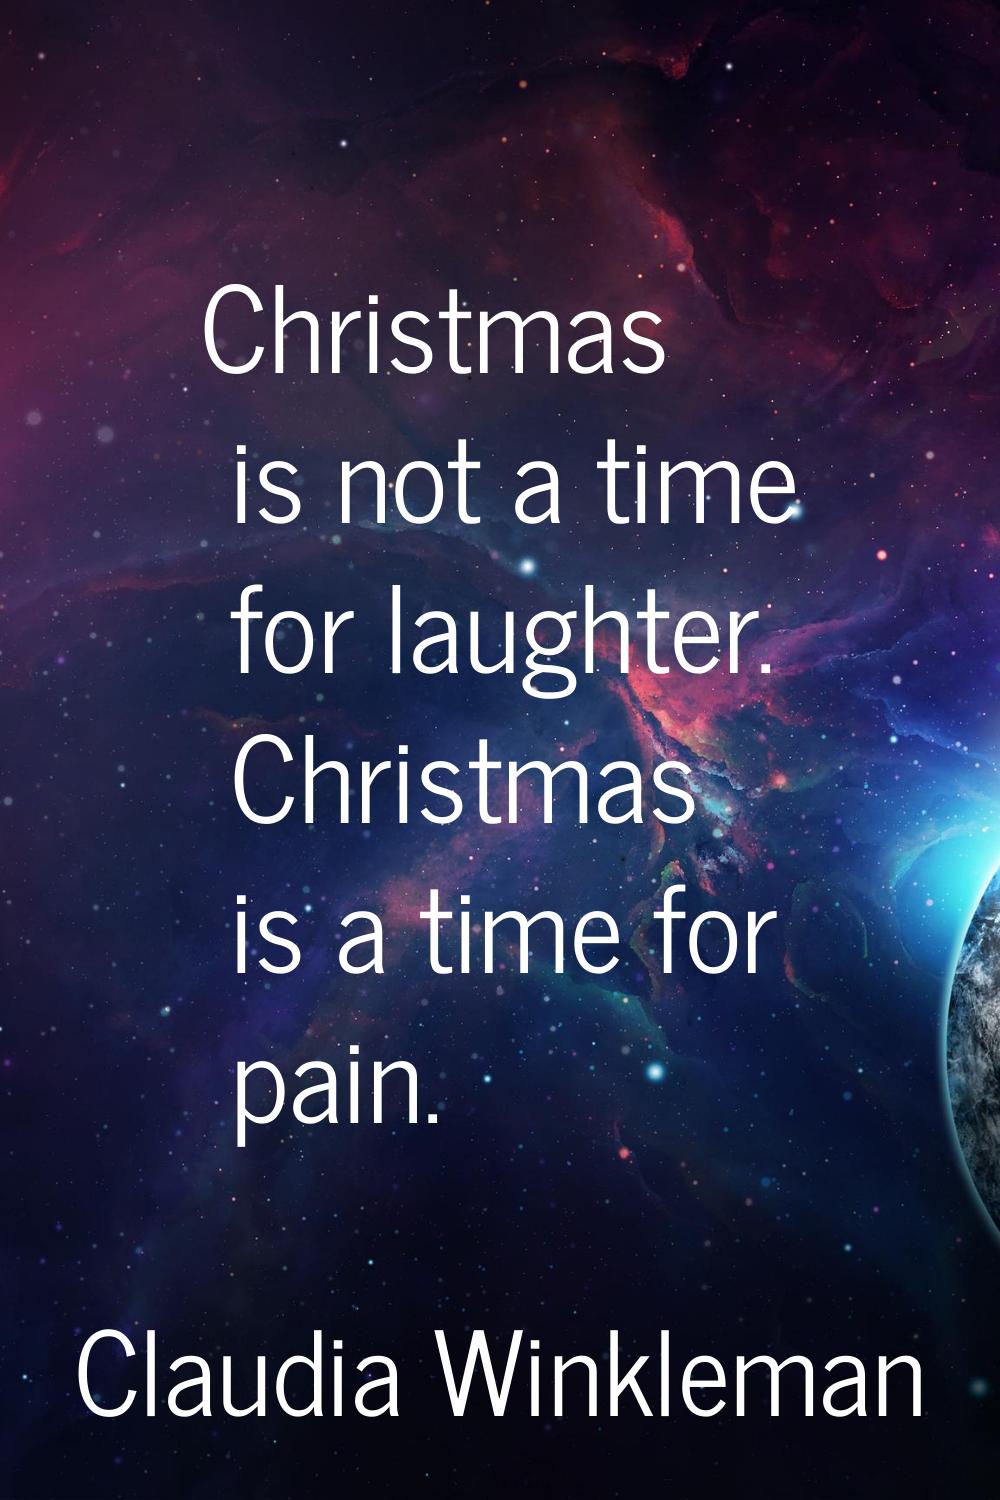 Christmas is not a time for laughter. Christmas is a time for pain.